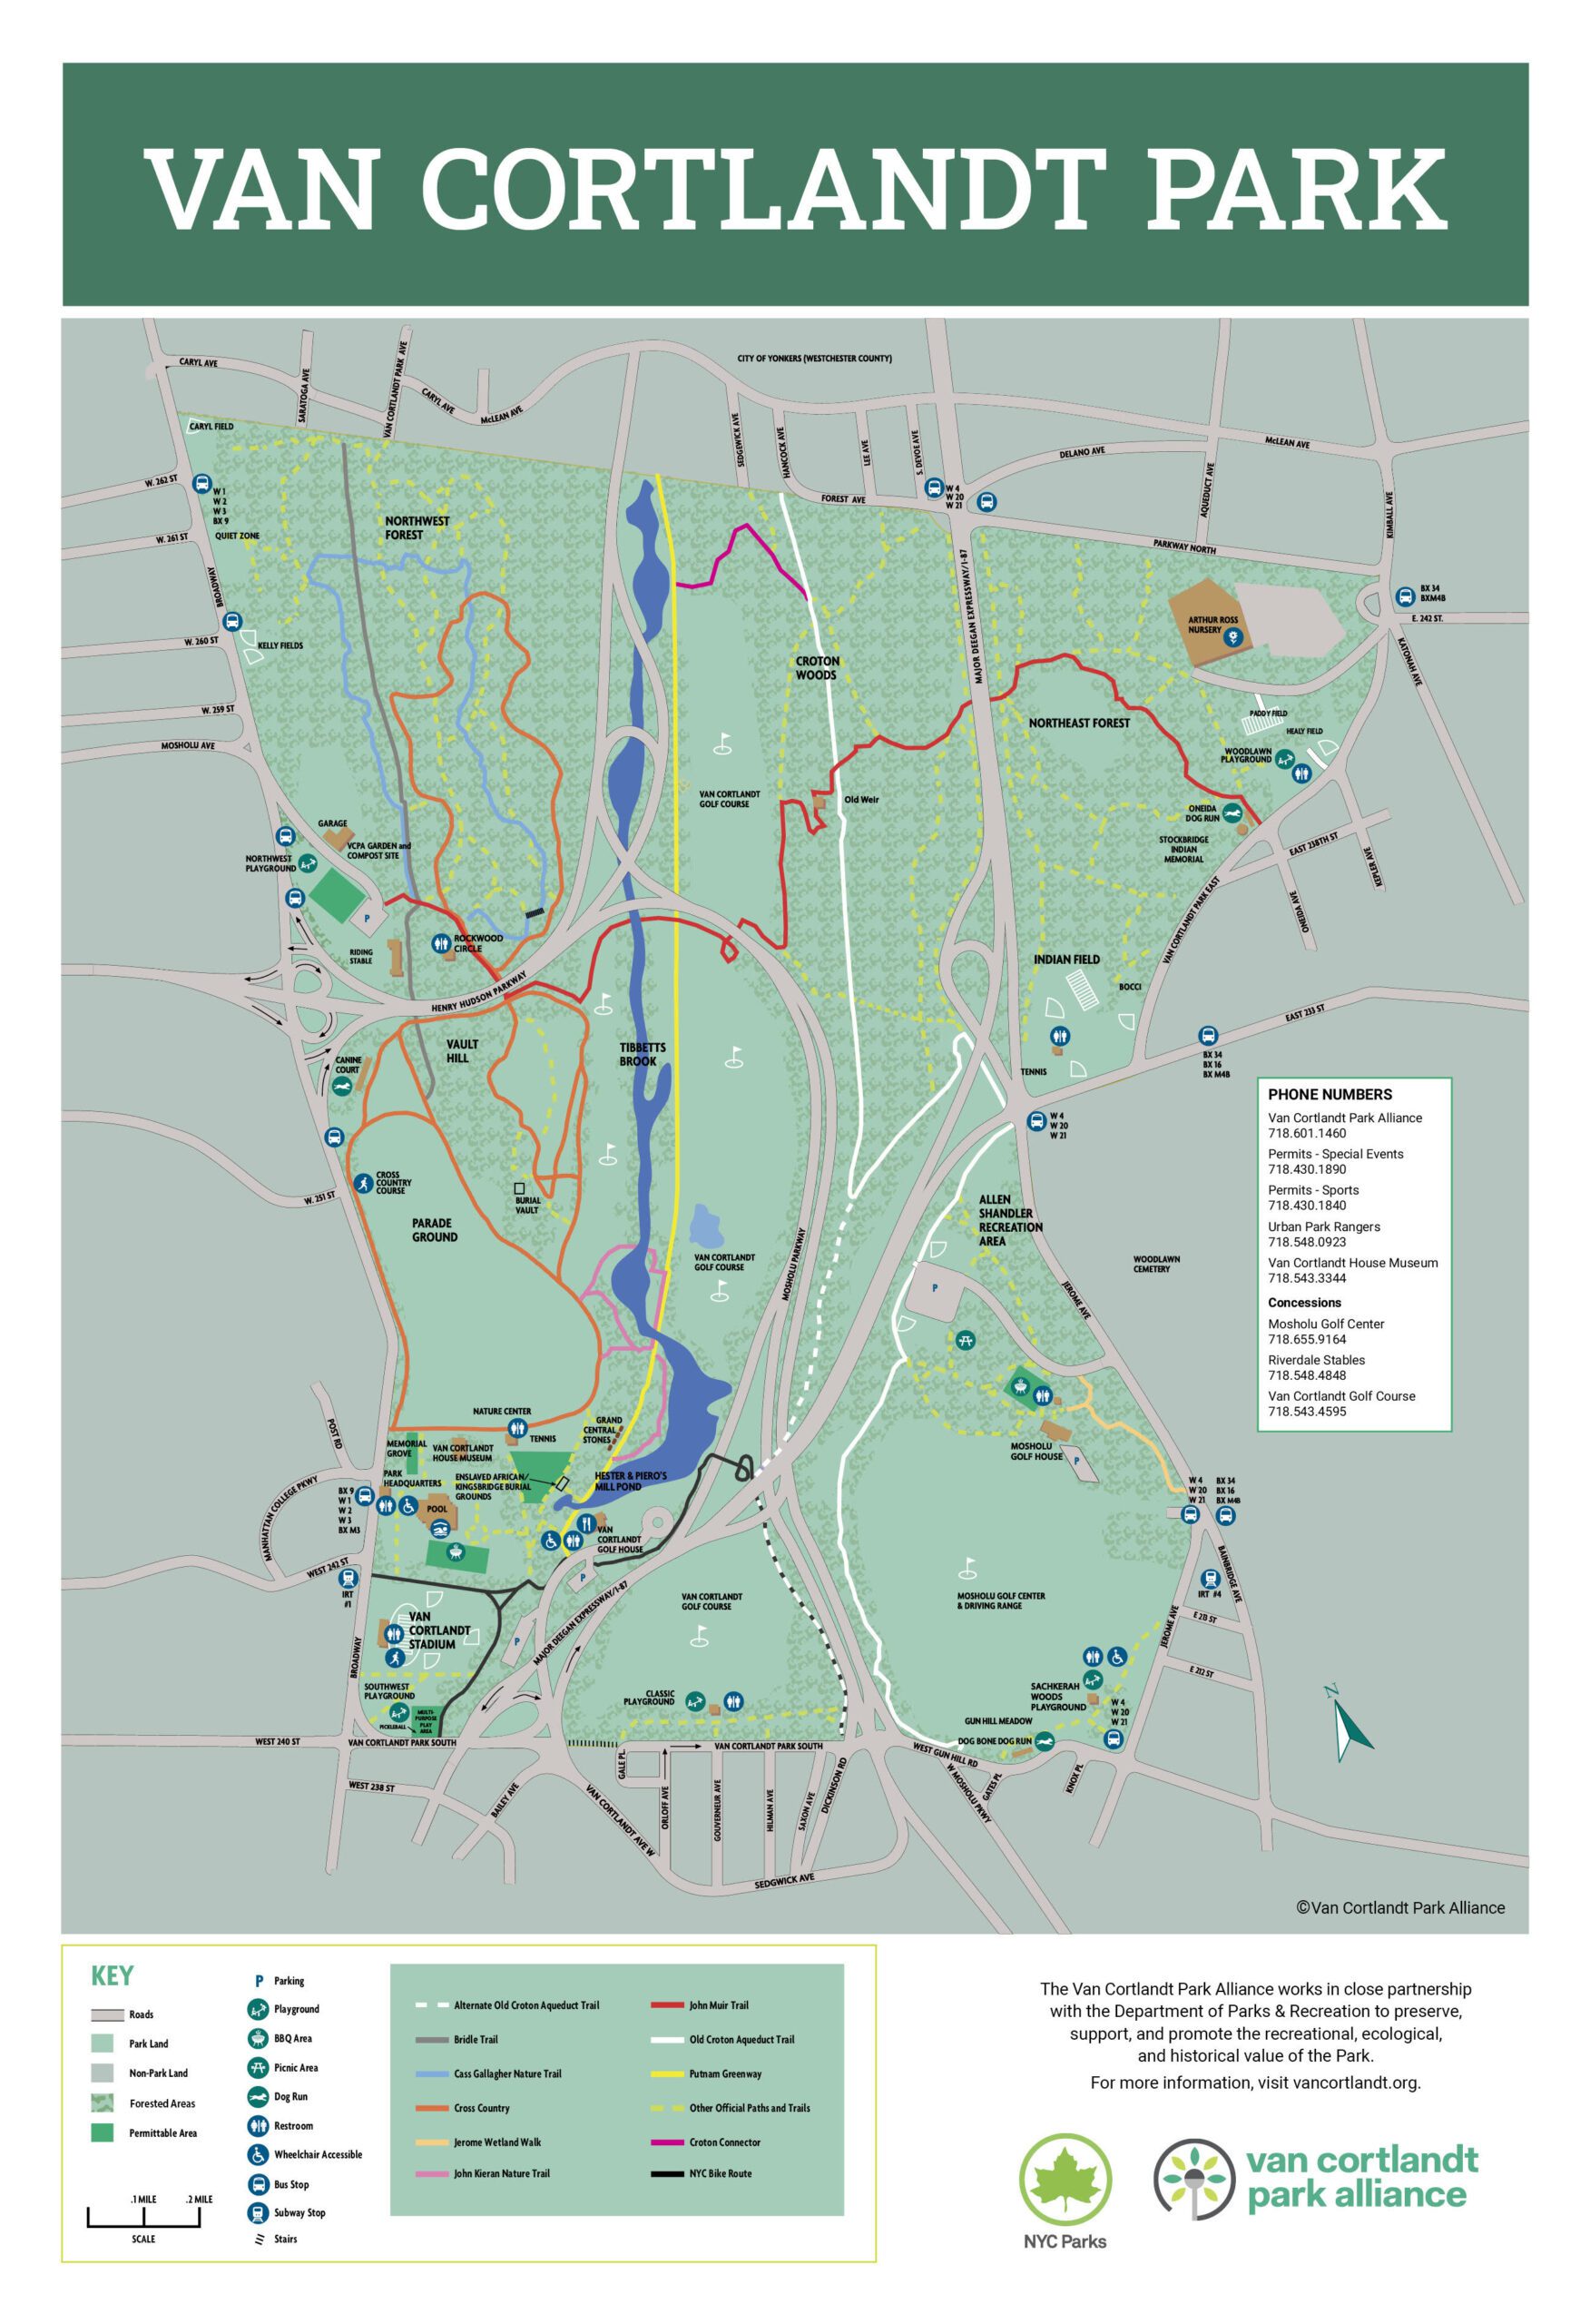 Van Cortlandt Park Trails: Hiking in the Bronx - offMetro NY